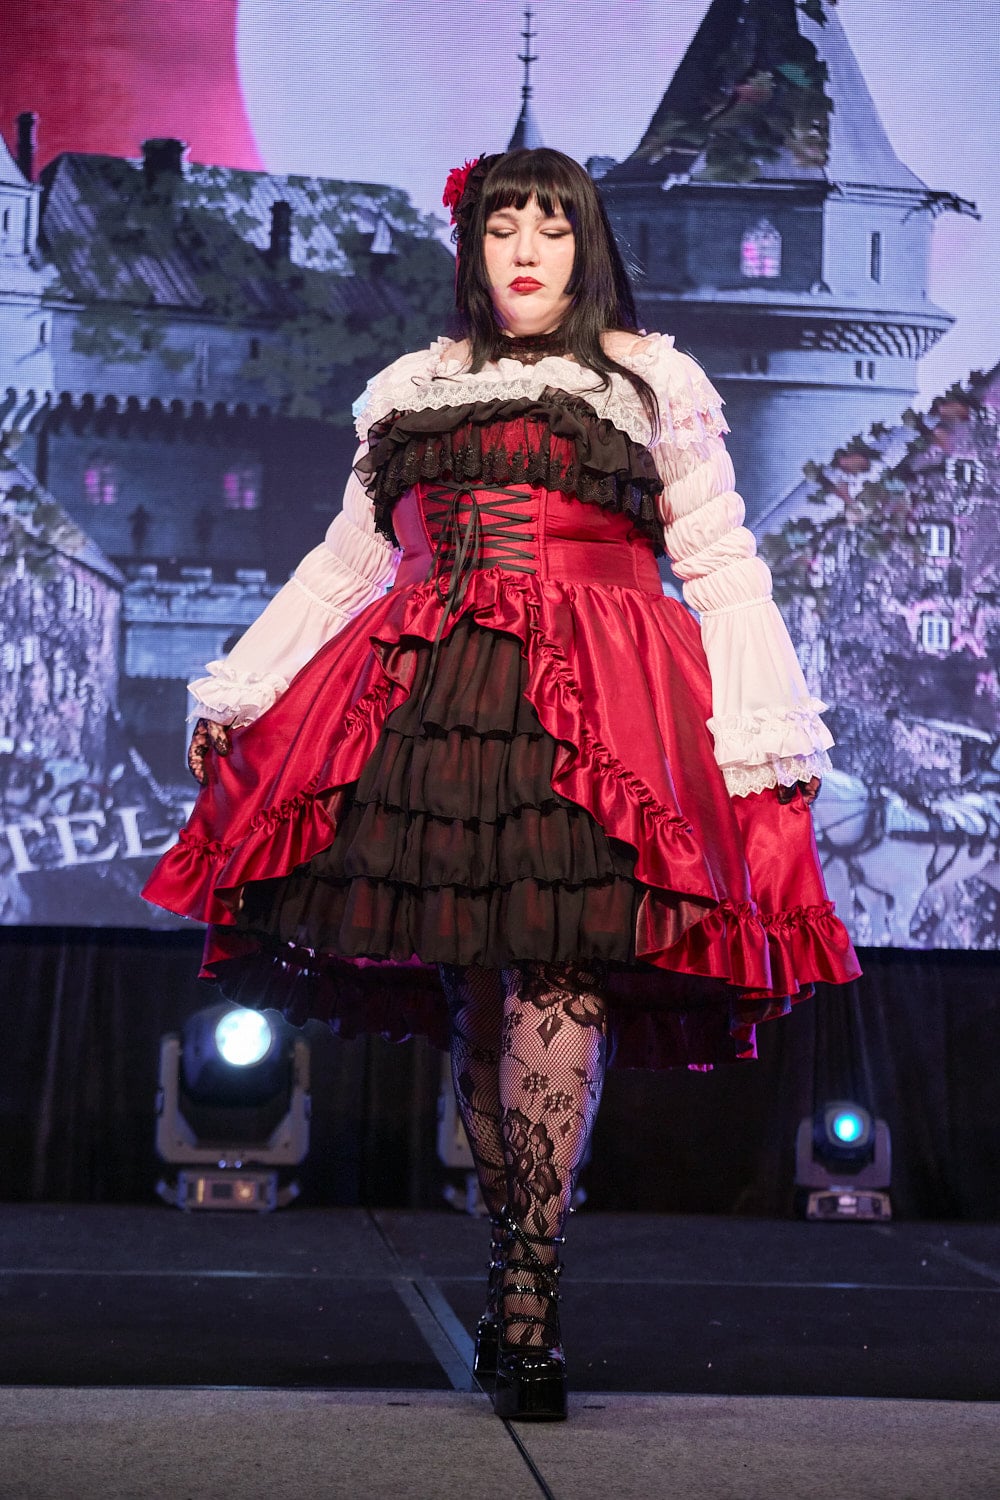 Plus size gothic lolita wearing red and black shantung bustle dress with white princess sleeve blouse, lace tights, and black shoes - full body 3.